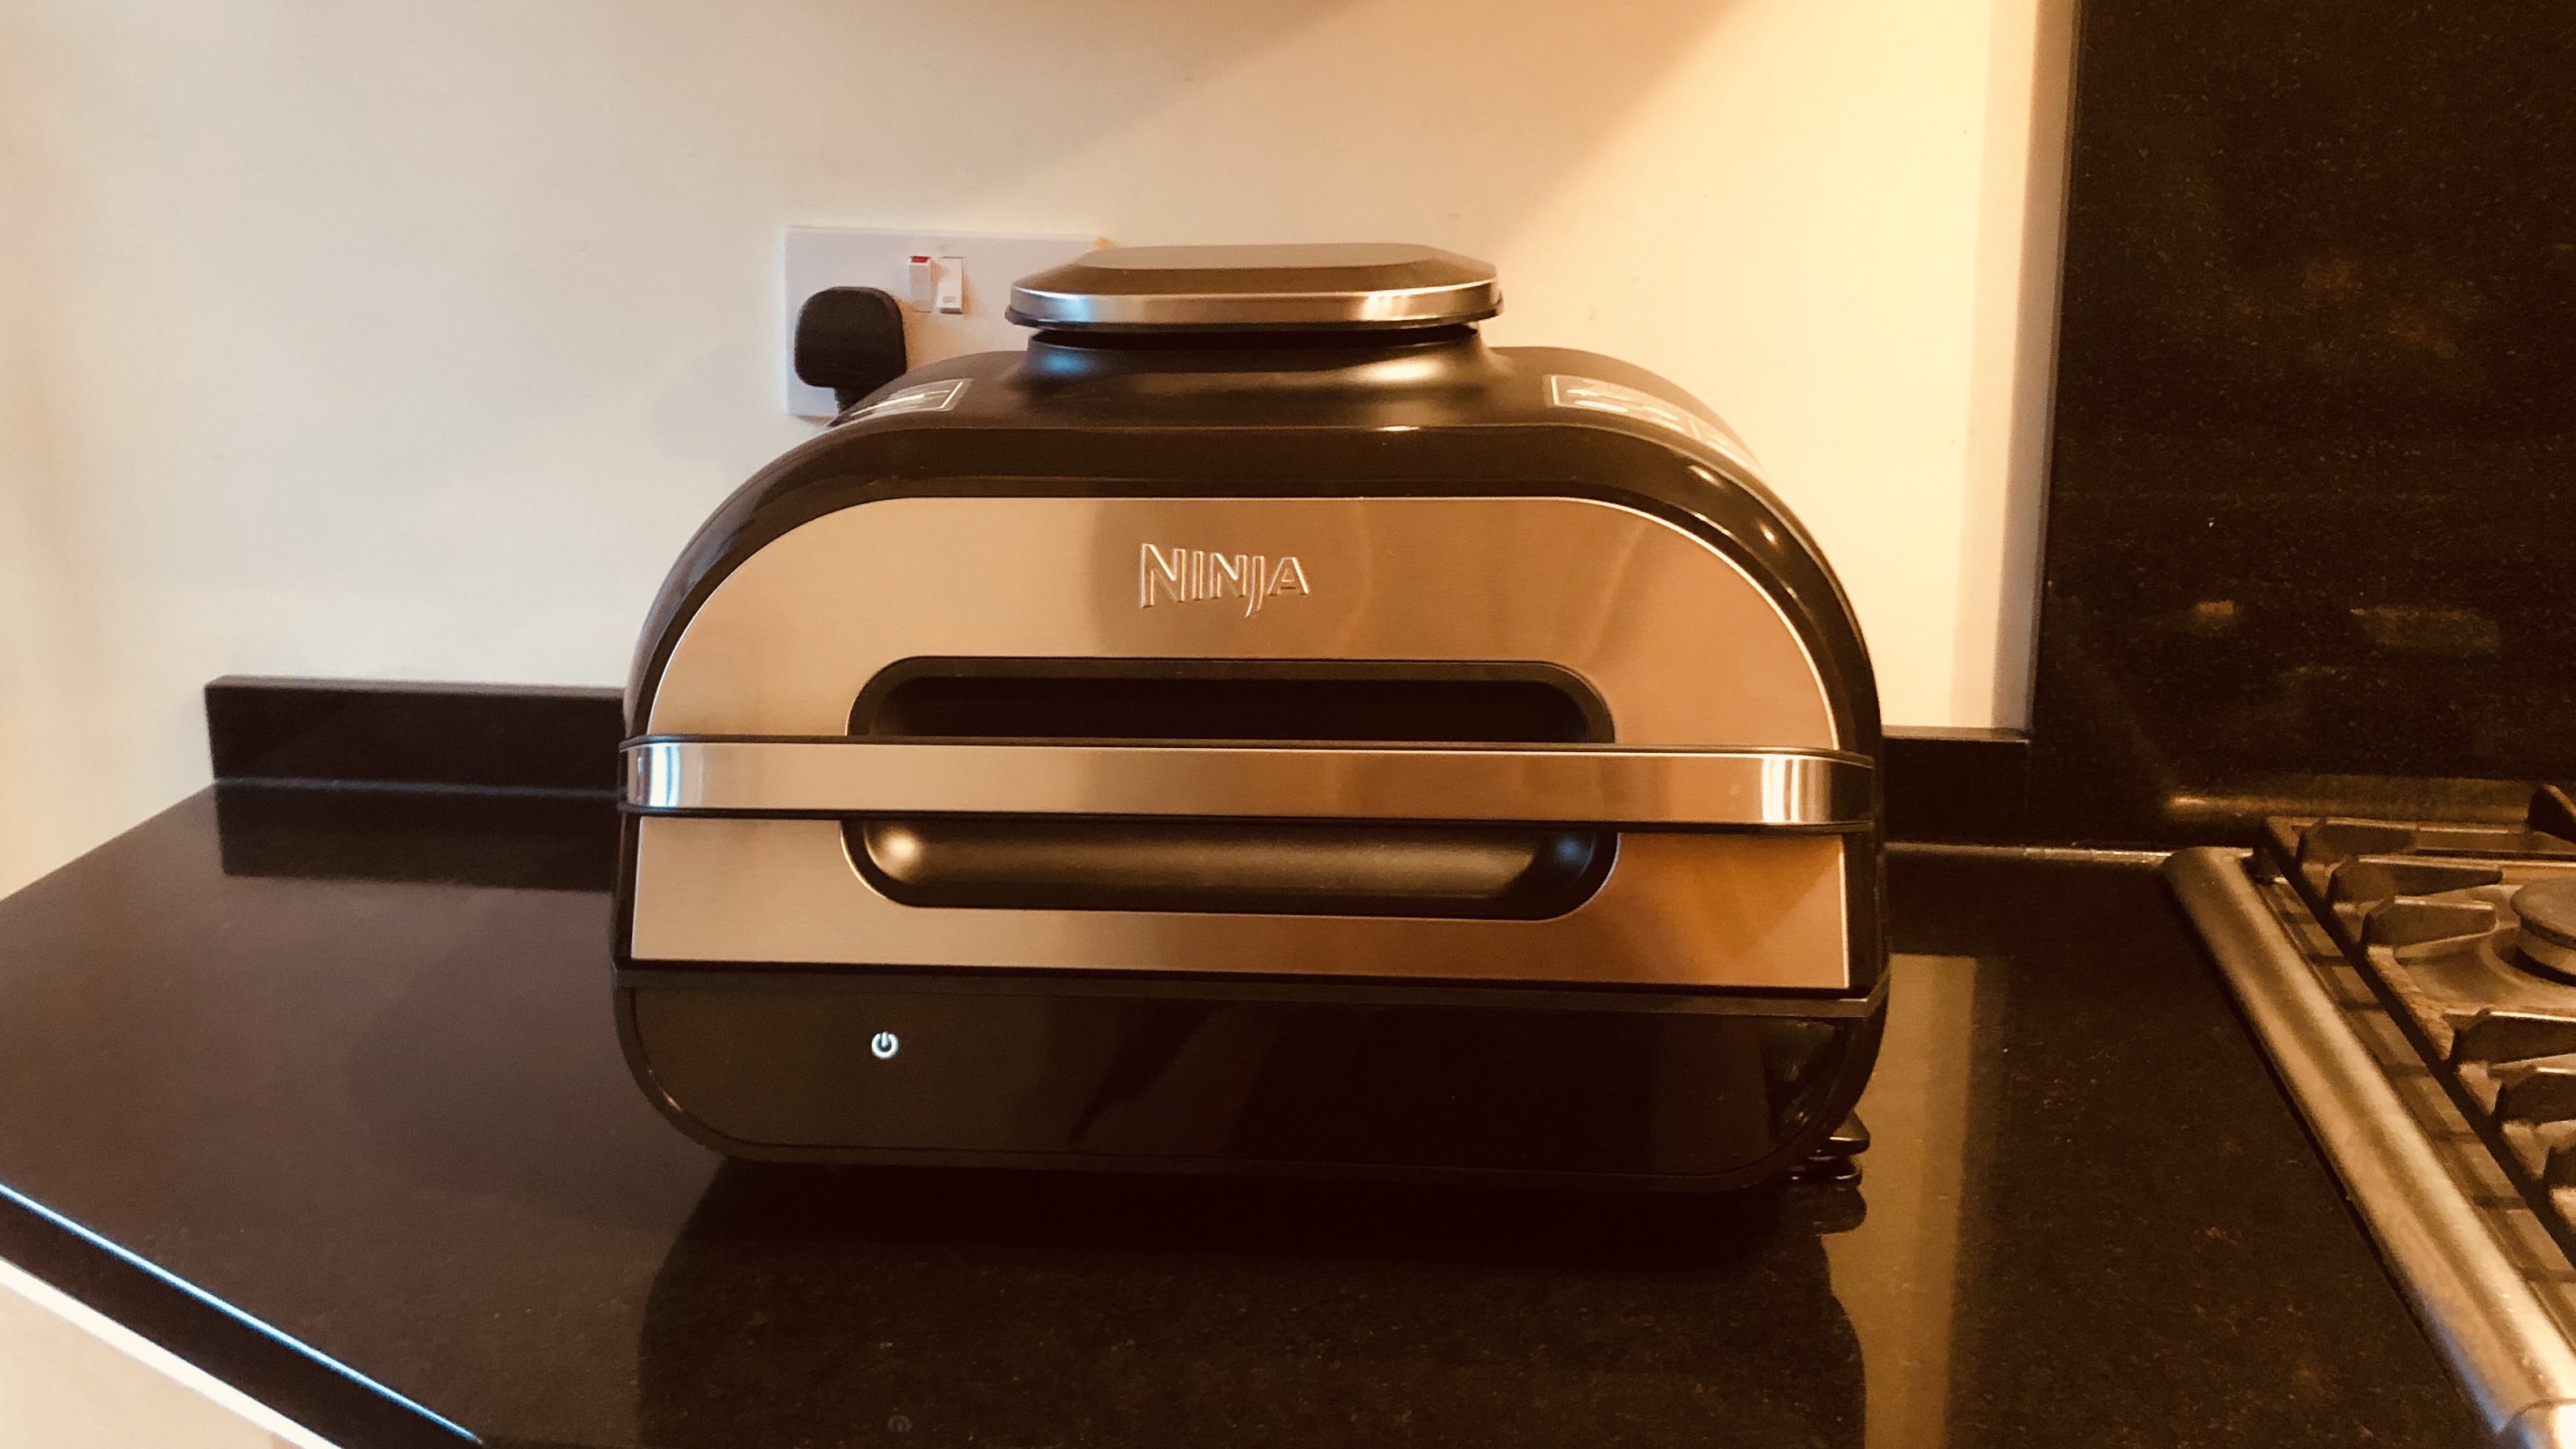 AG551UK, Ninja Grill and Air Fryer